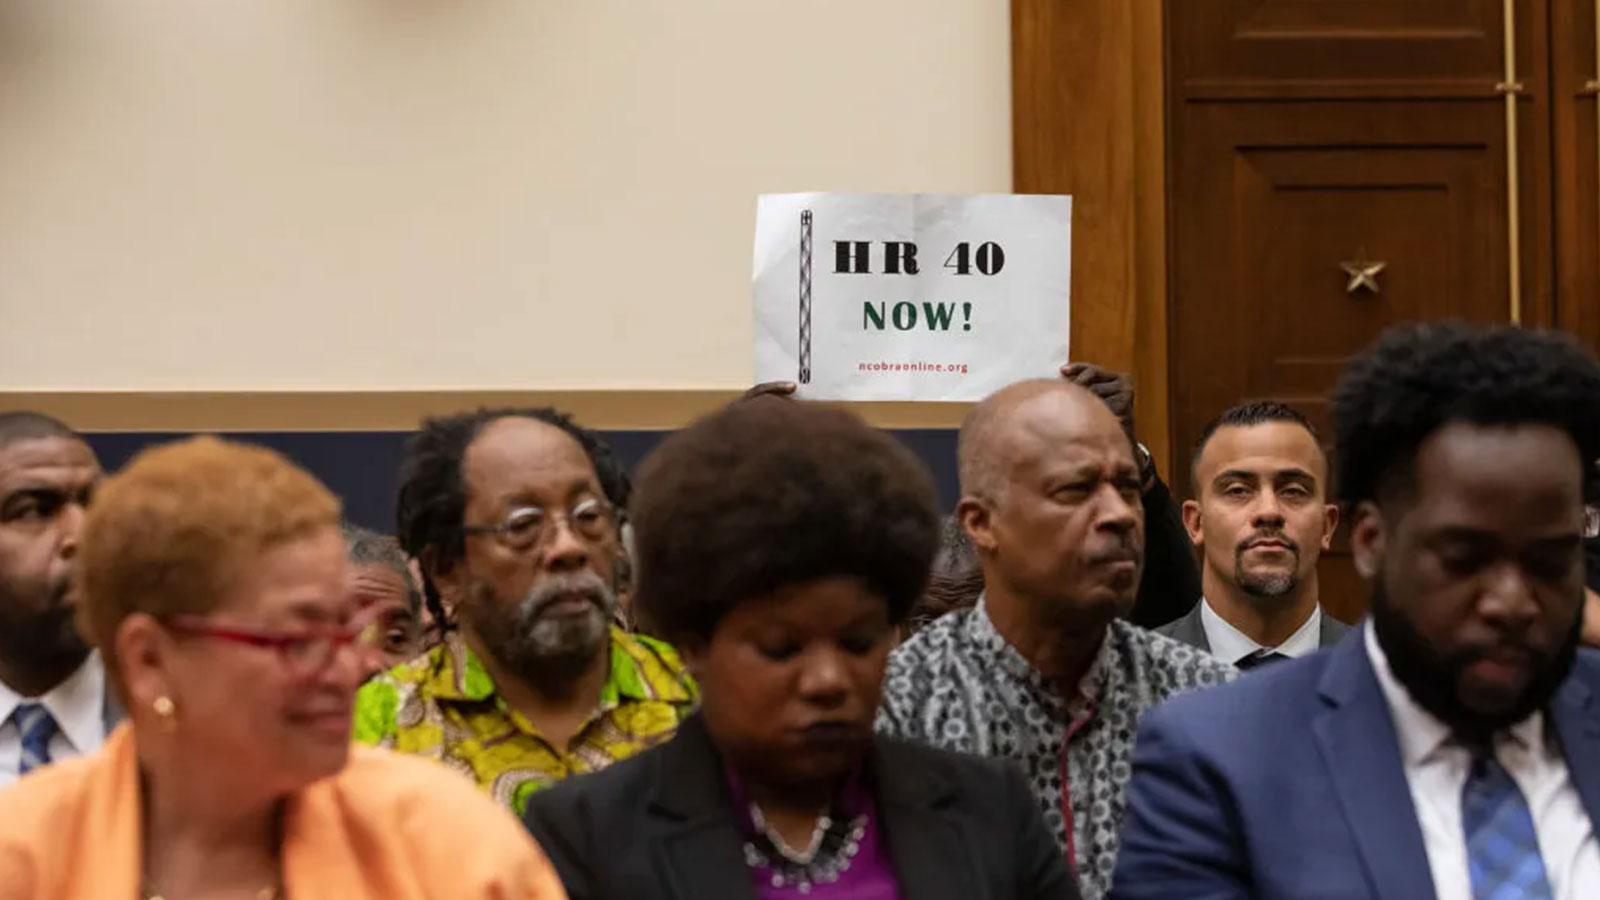 Attendees representing various groups at the 2019 Congressional hearing on reparations.